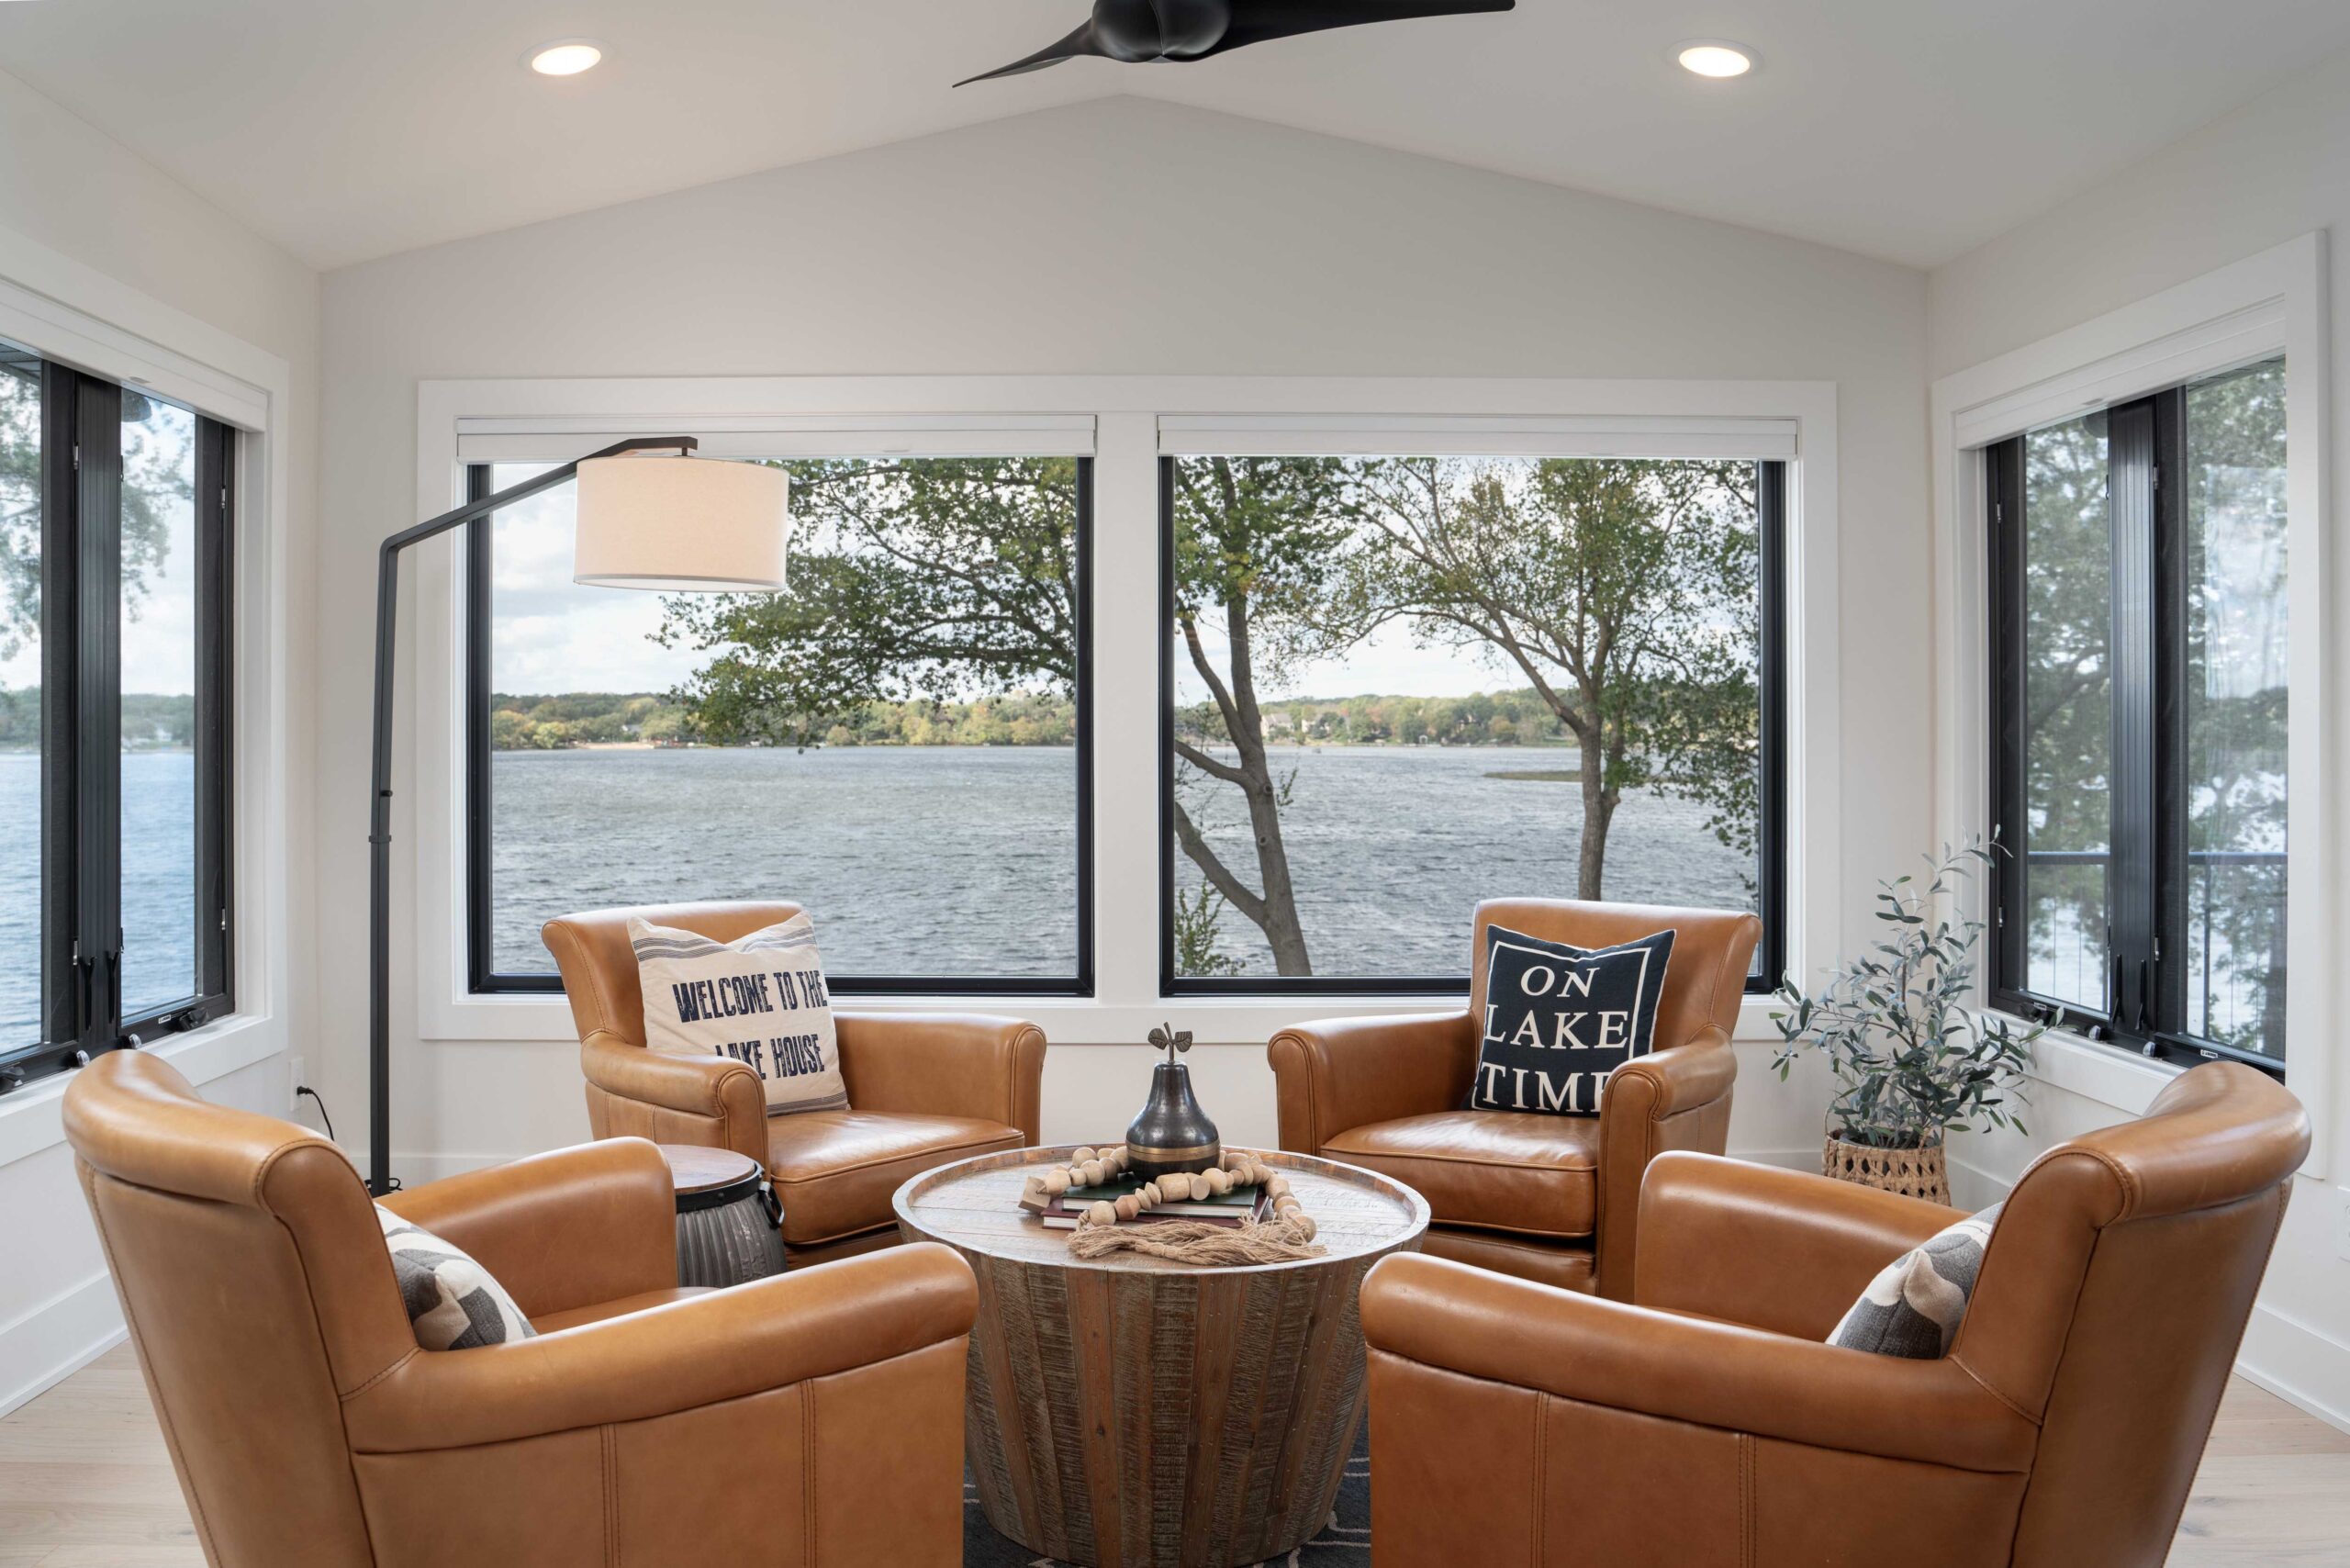 This Orchard Lake Remodel features a inviting living room with luxurious leather chairs and stunning views of the lake.